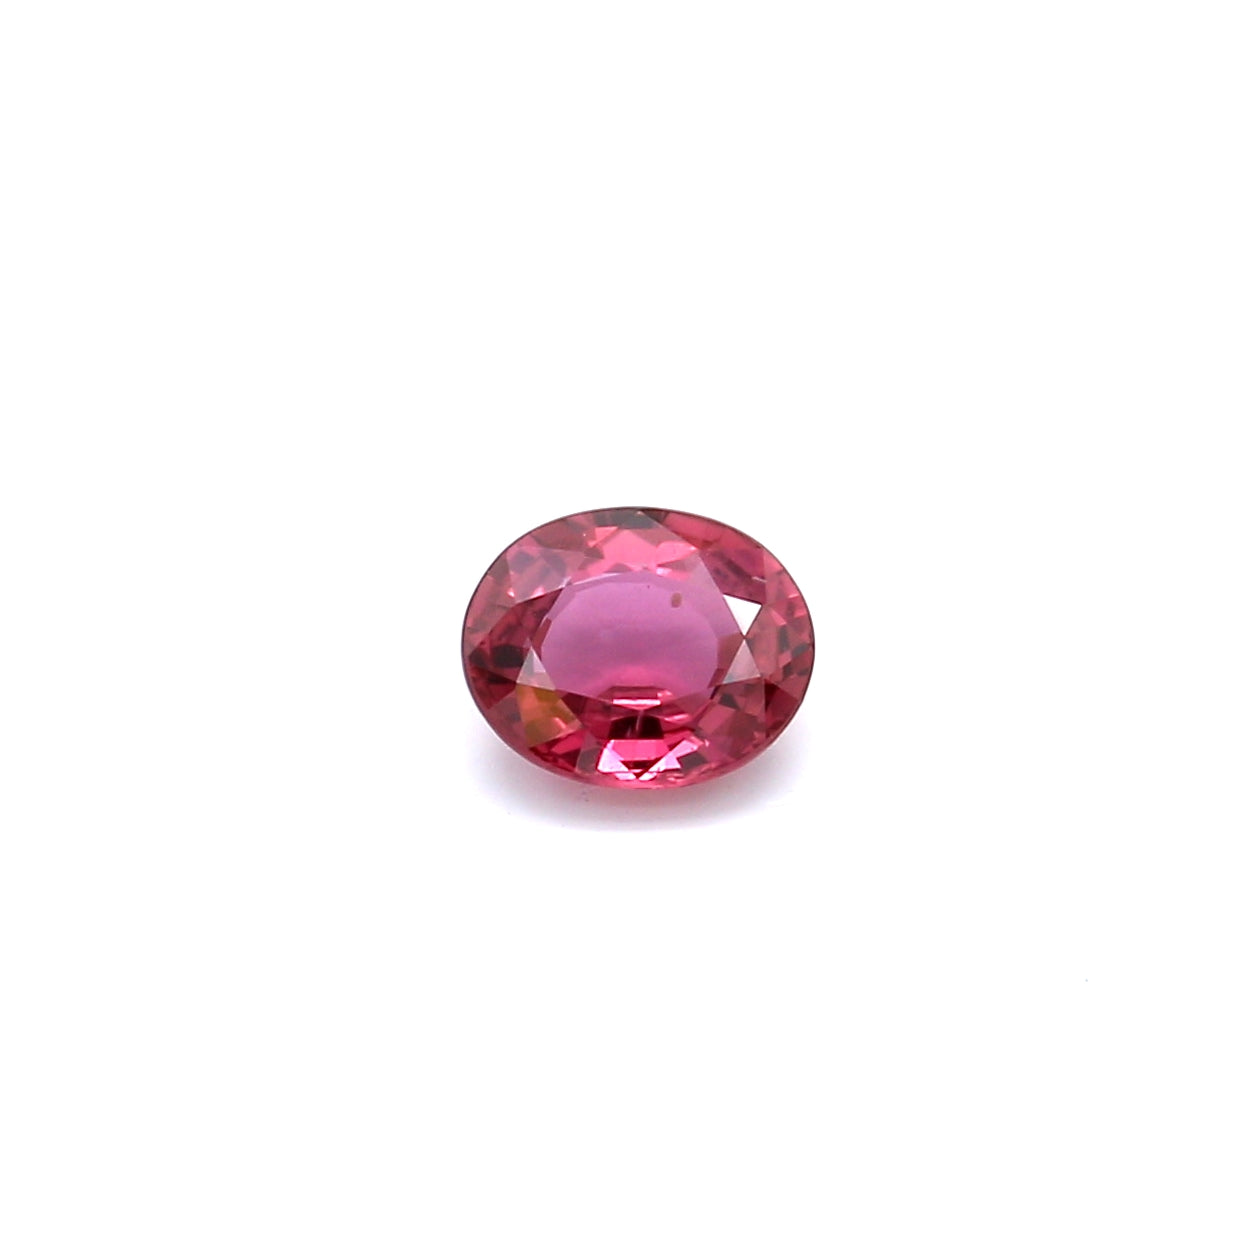 0.70ct Pinkish Red, Oval Ruby, Heated, Thailand - 5.98 x 4.94 x 2.59mm